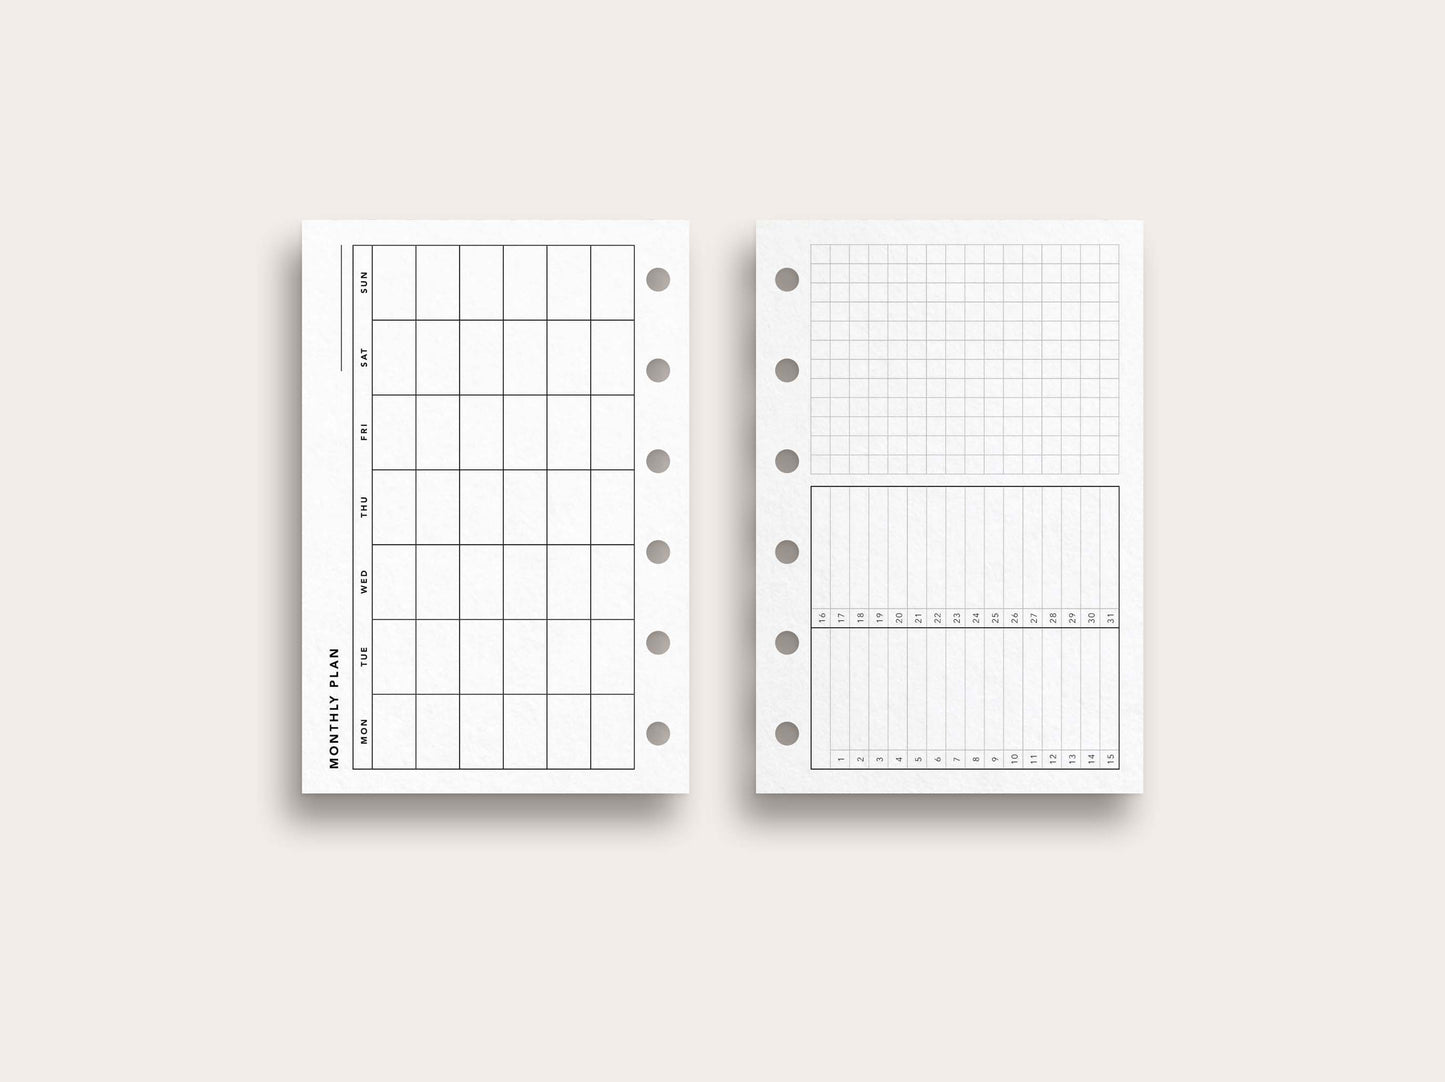 Monthly Planner No. 10